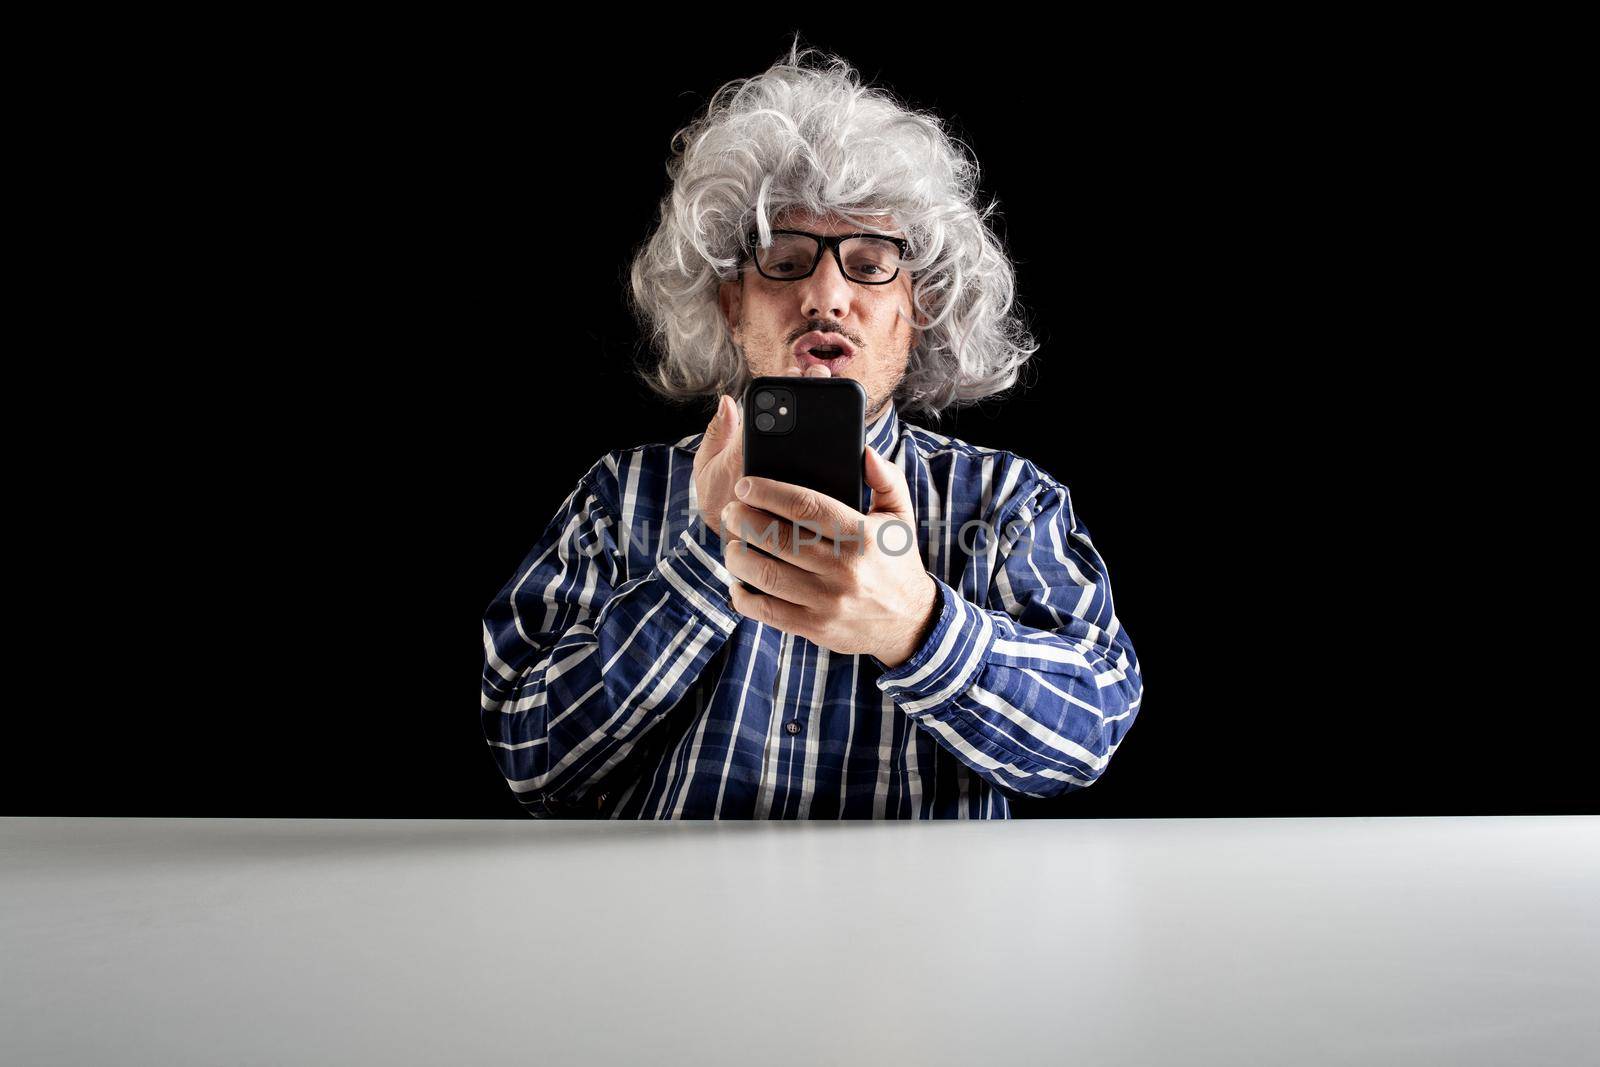 Man sitting at the desk blowing kiss having a videochat using a smartphone on black background